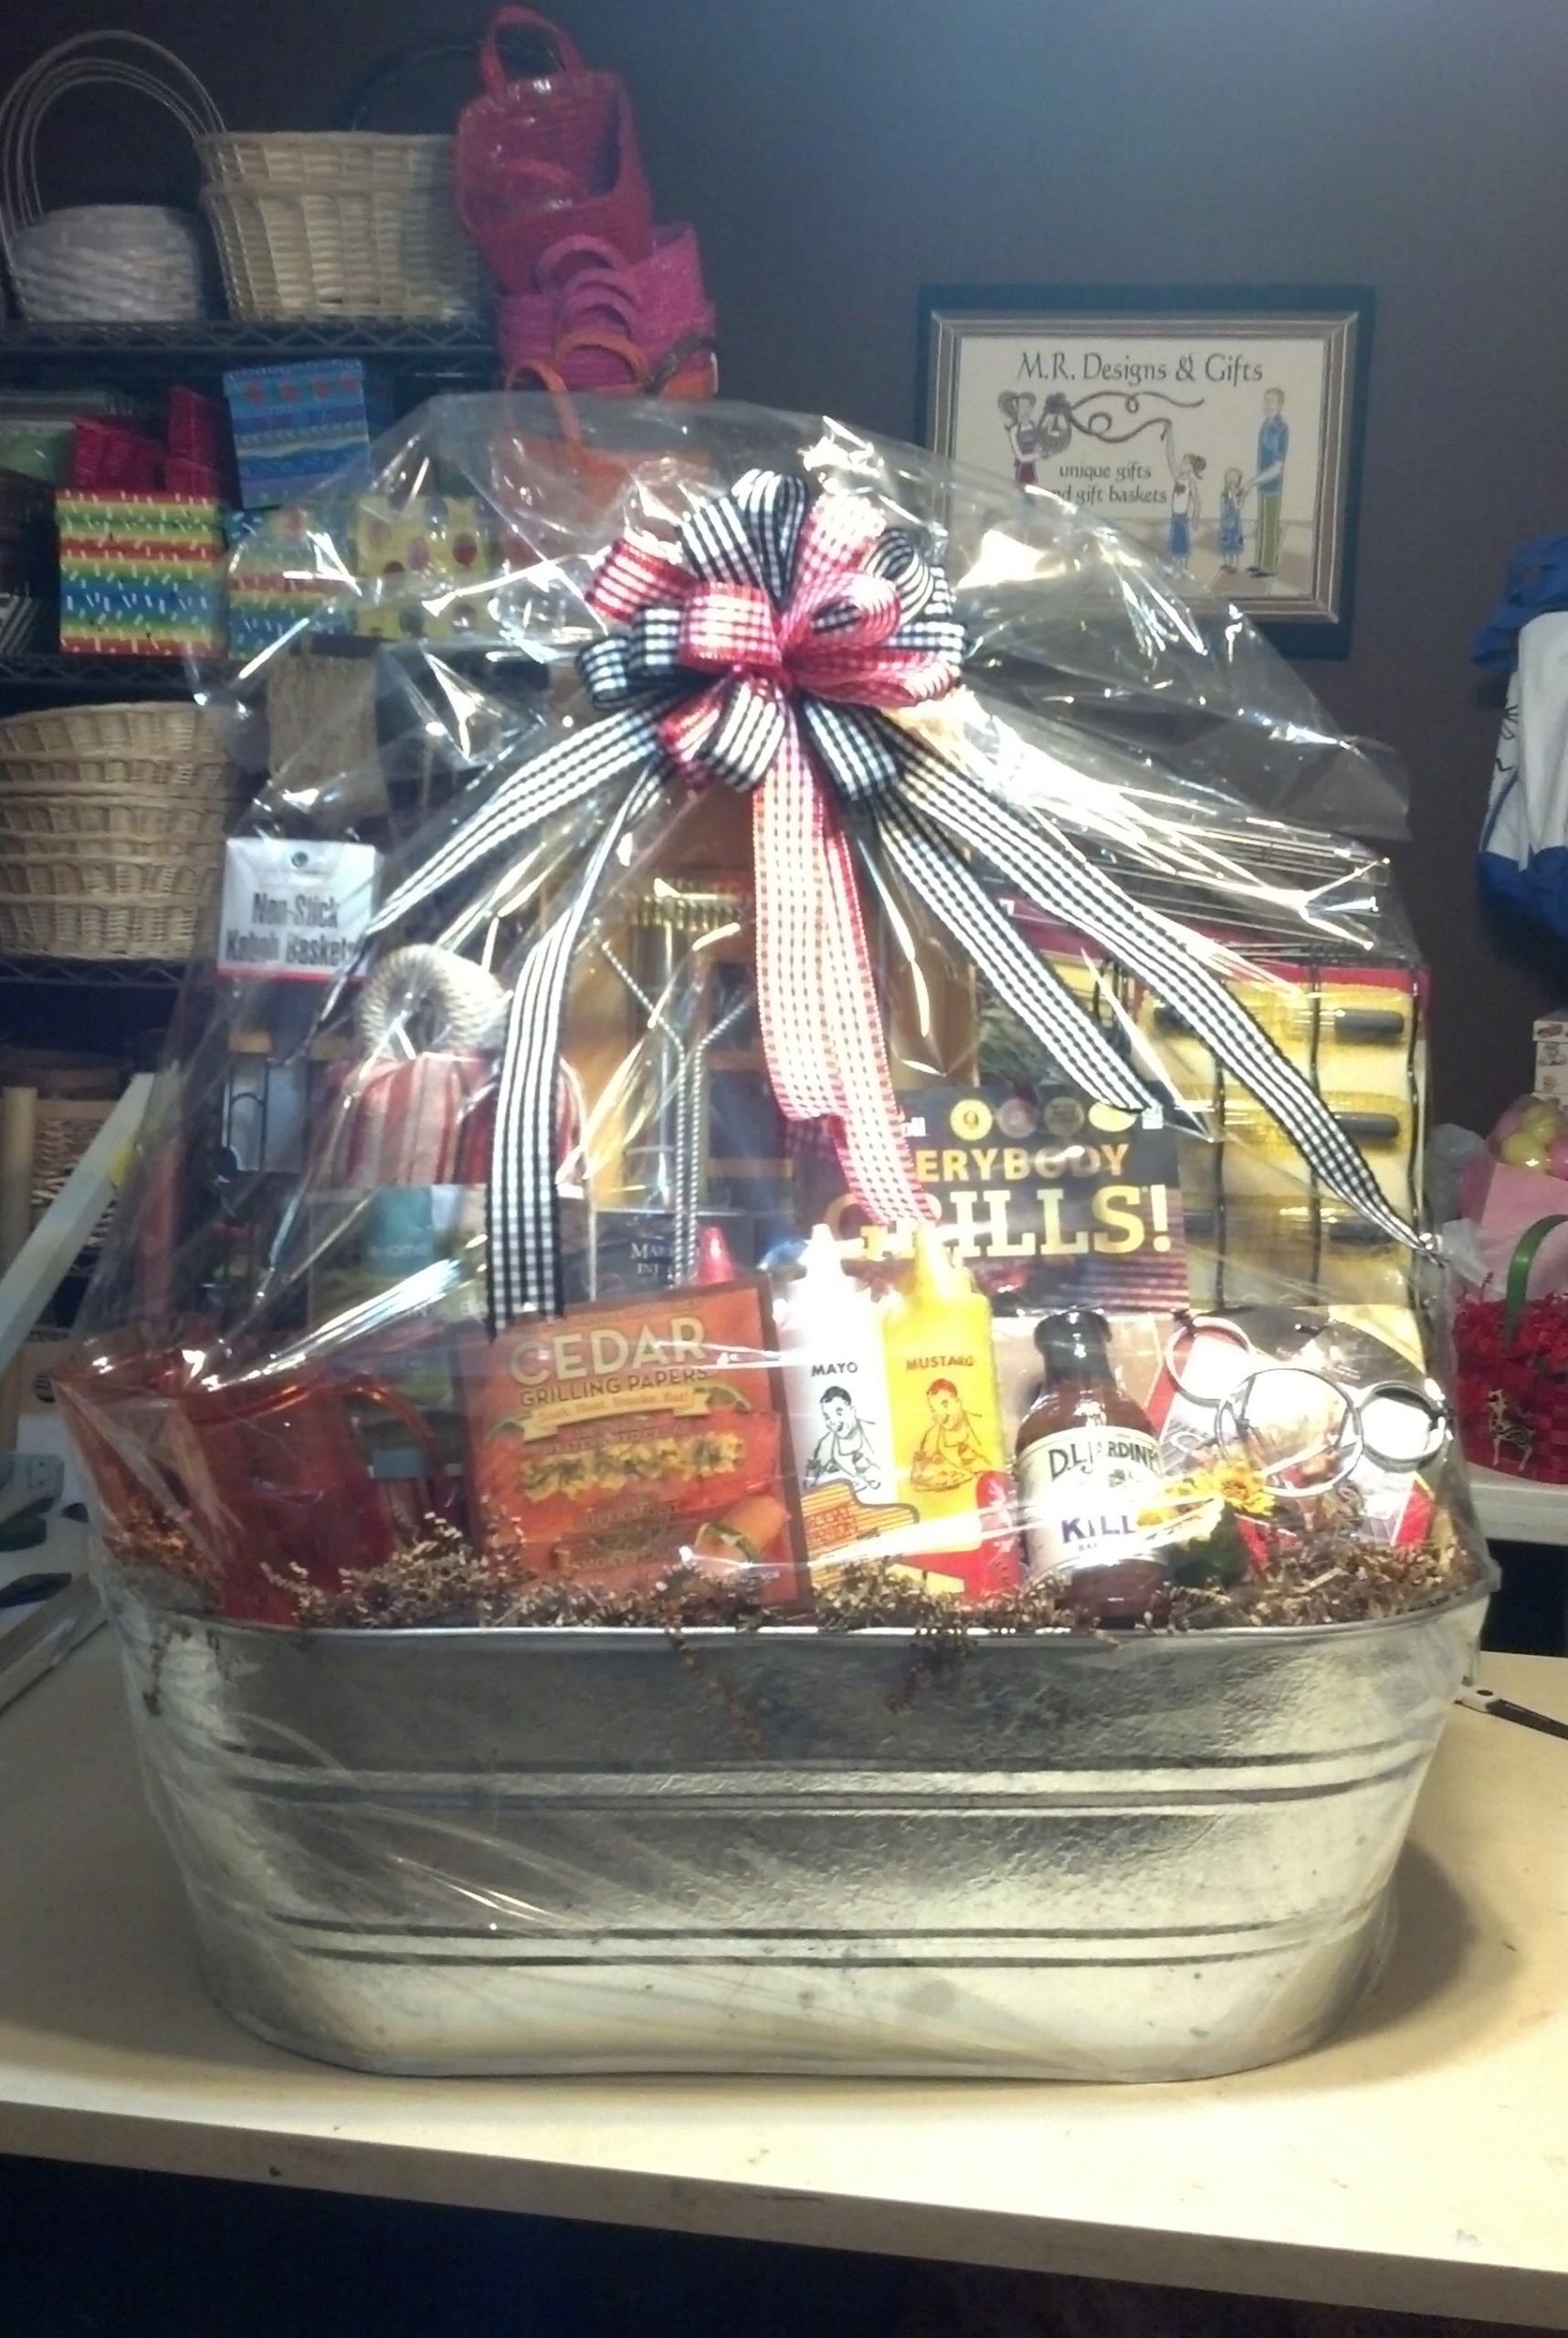 Donation Gift Basket Ideas
 Special Event and Silent Auction Gift Basket Ideas by M R